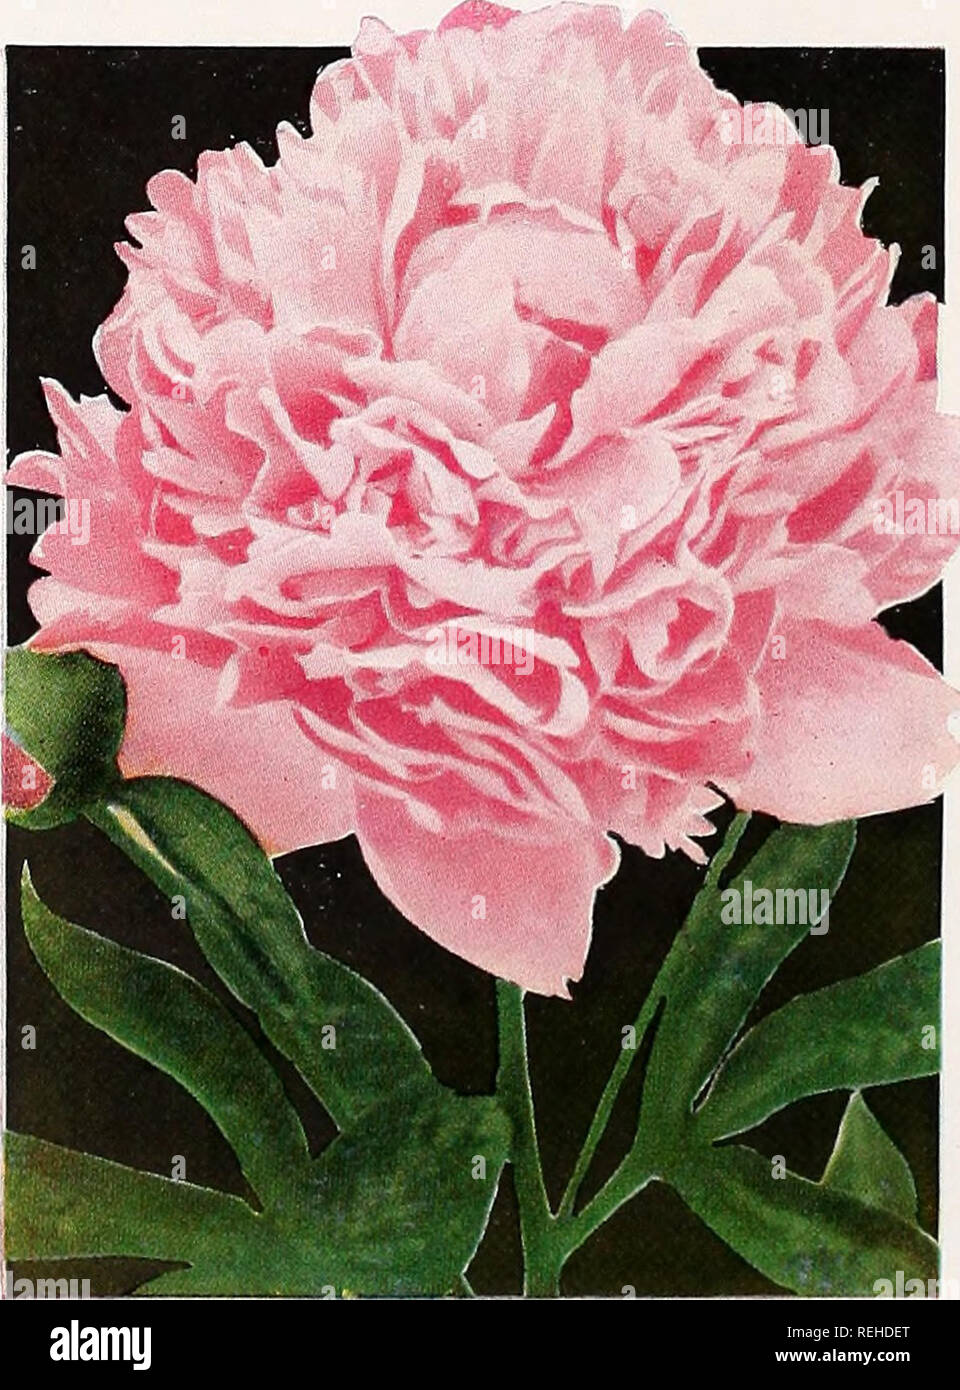 . Columbia &amp; Okanogan Nursery Company : fall 1953 spring 1954. Nurseries (Horticulture) South Carolina Catalogs; Fruit trees South Carolina Catalogs; Roses South Carolina Catalogs; Flowering shrubs South Carolina Catalogs; Trees South Carolina Catalogs; Shade trees South Carolina Catalogs. HALL'S HONEYSUCKLE PEONIES—Continued Duchess de Nemours, 8.1—White with sulphur yellow center 1.10 Kelways Glorious, 9.8—Large white with crimson streaks on outside guard petals. Strong grower 2.25 LeCygne 9.9—(The Swan) Pure white, highest rated peony 2.25 PINK Floral Treasure, 7.5—Rich pink and salmon  Stock Photo